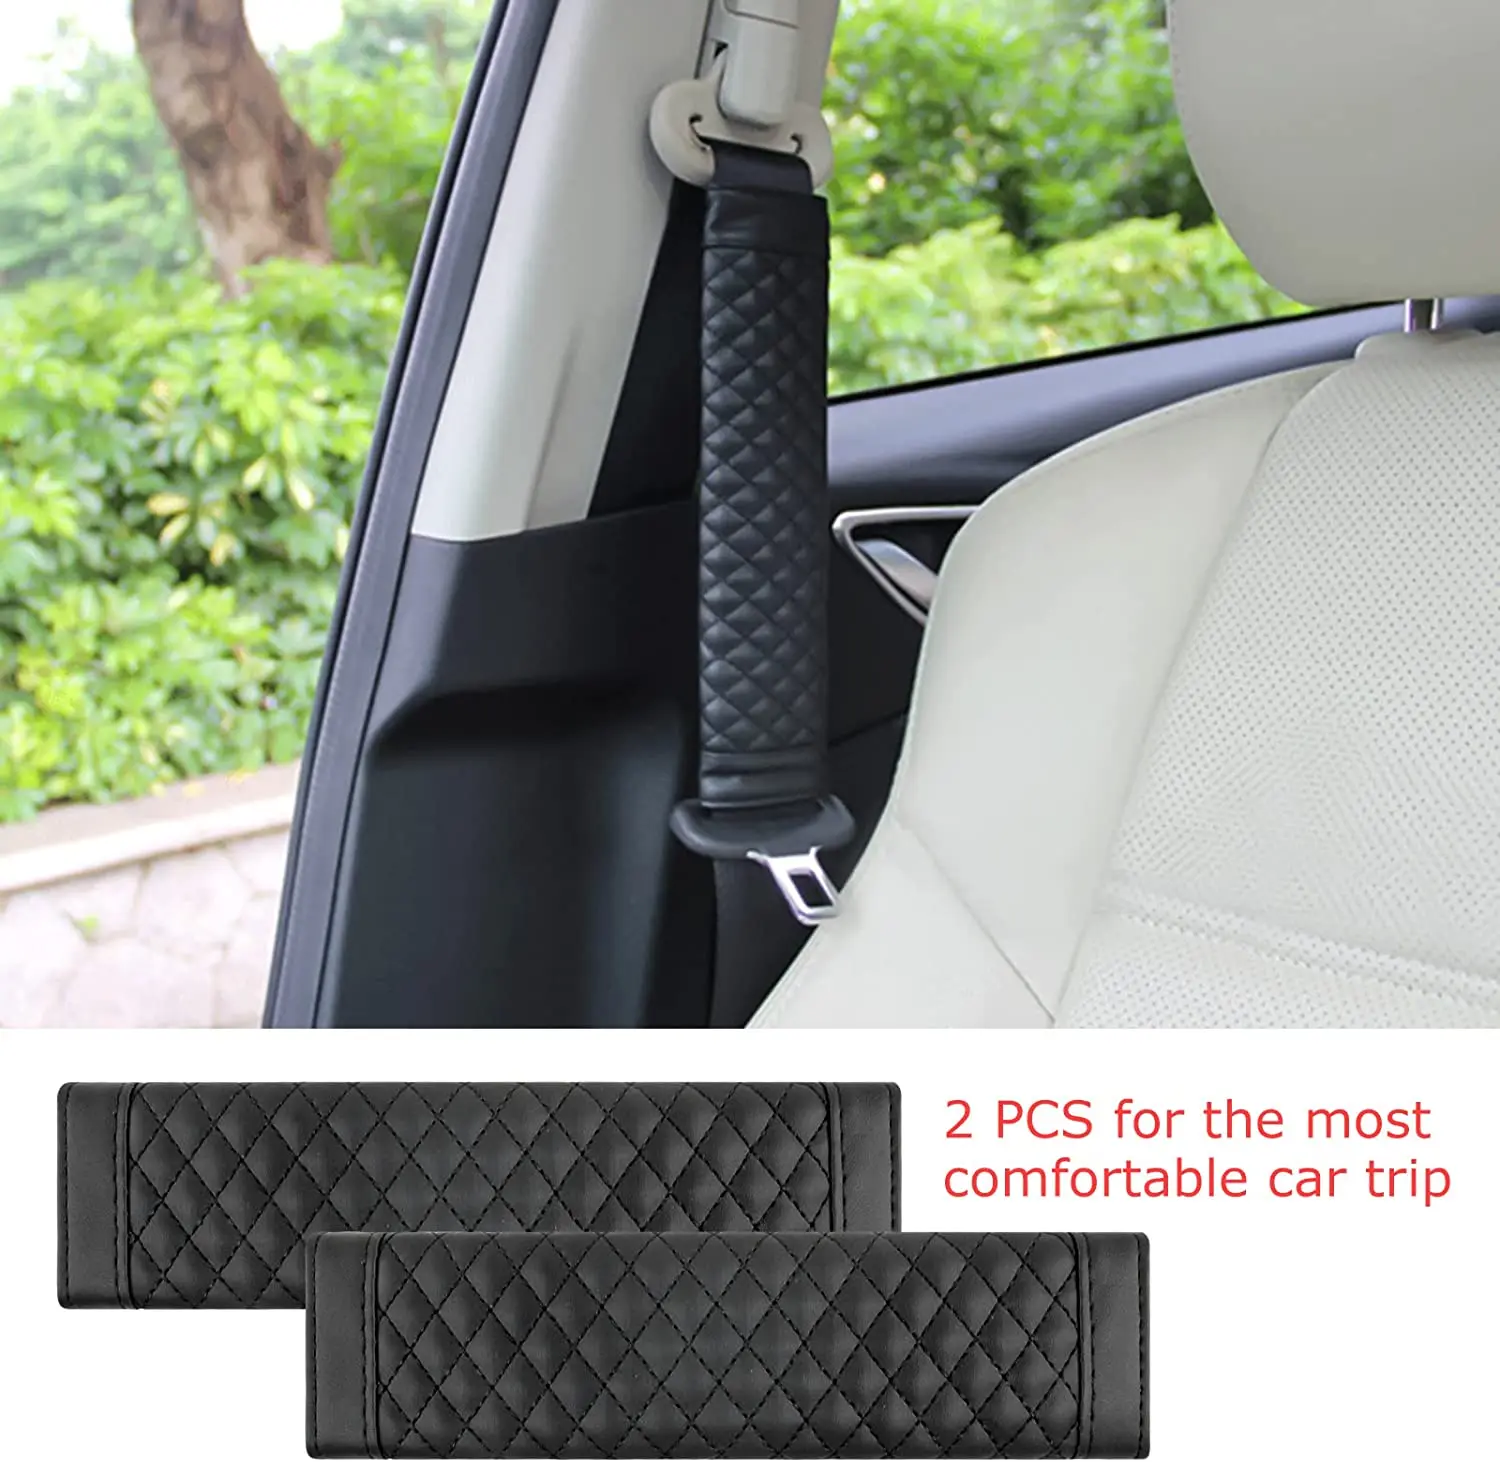 Boshiho 2 packs Car Seat Belt leather Cover Seat Belt Buckle Cover Seatbelt Pad For A More Comfortable Driving